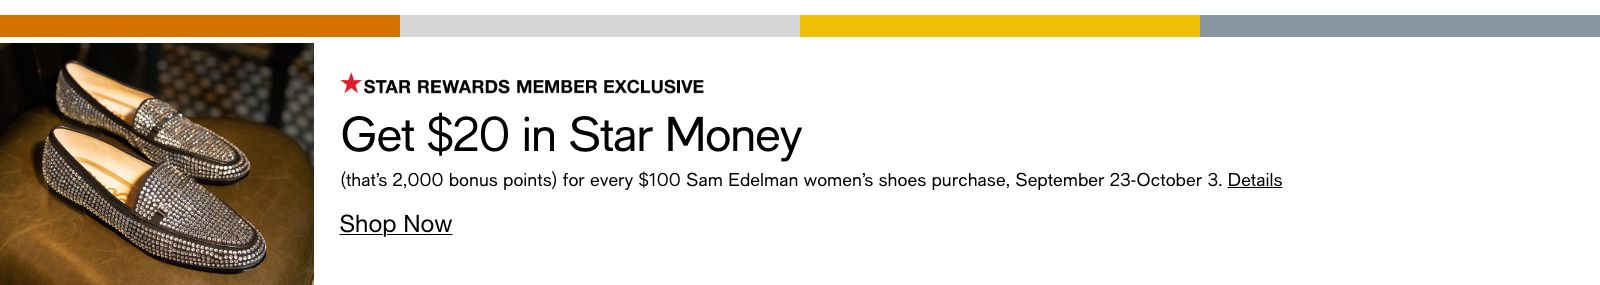 Star Rewards Member Exclusive, Get $20 in Star Money, (that's 2,000 bonus points) for every $100 Sam Edelman women's shoes purchase, September 23-October 3, Details, Shop Now